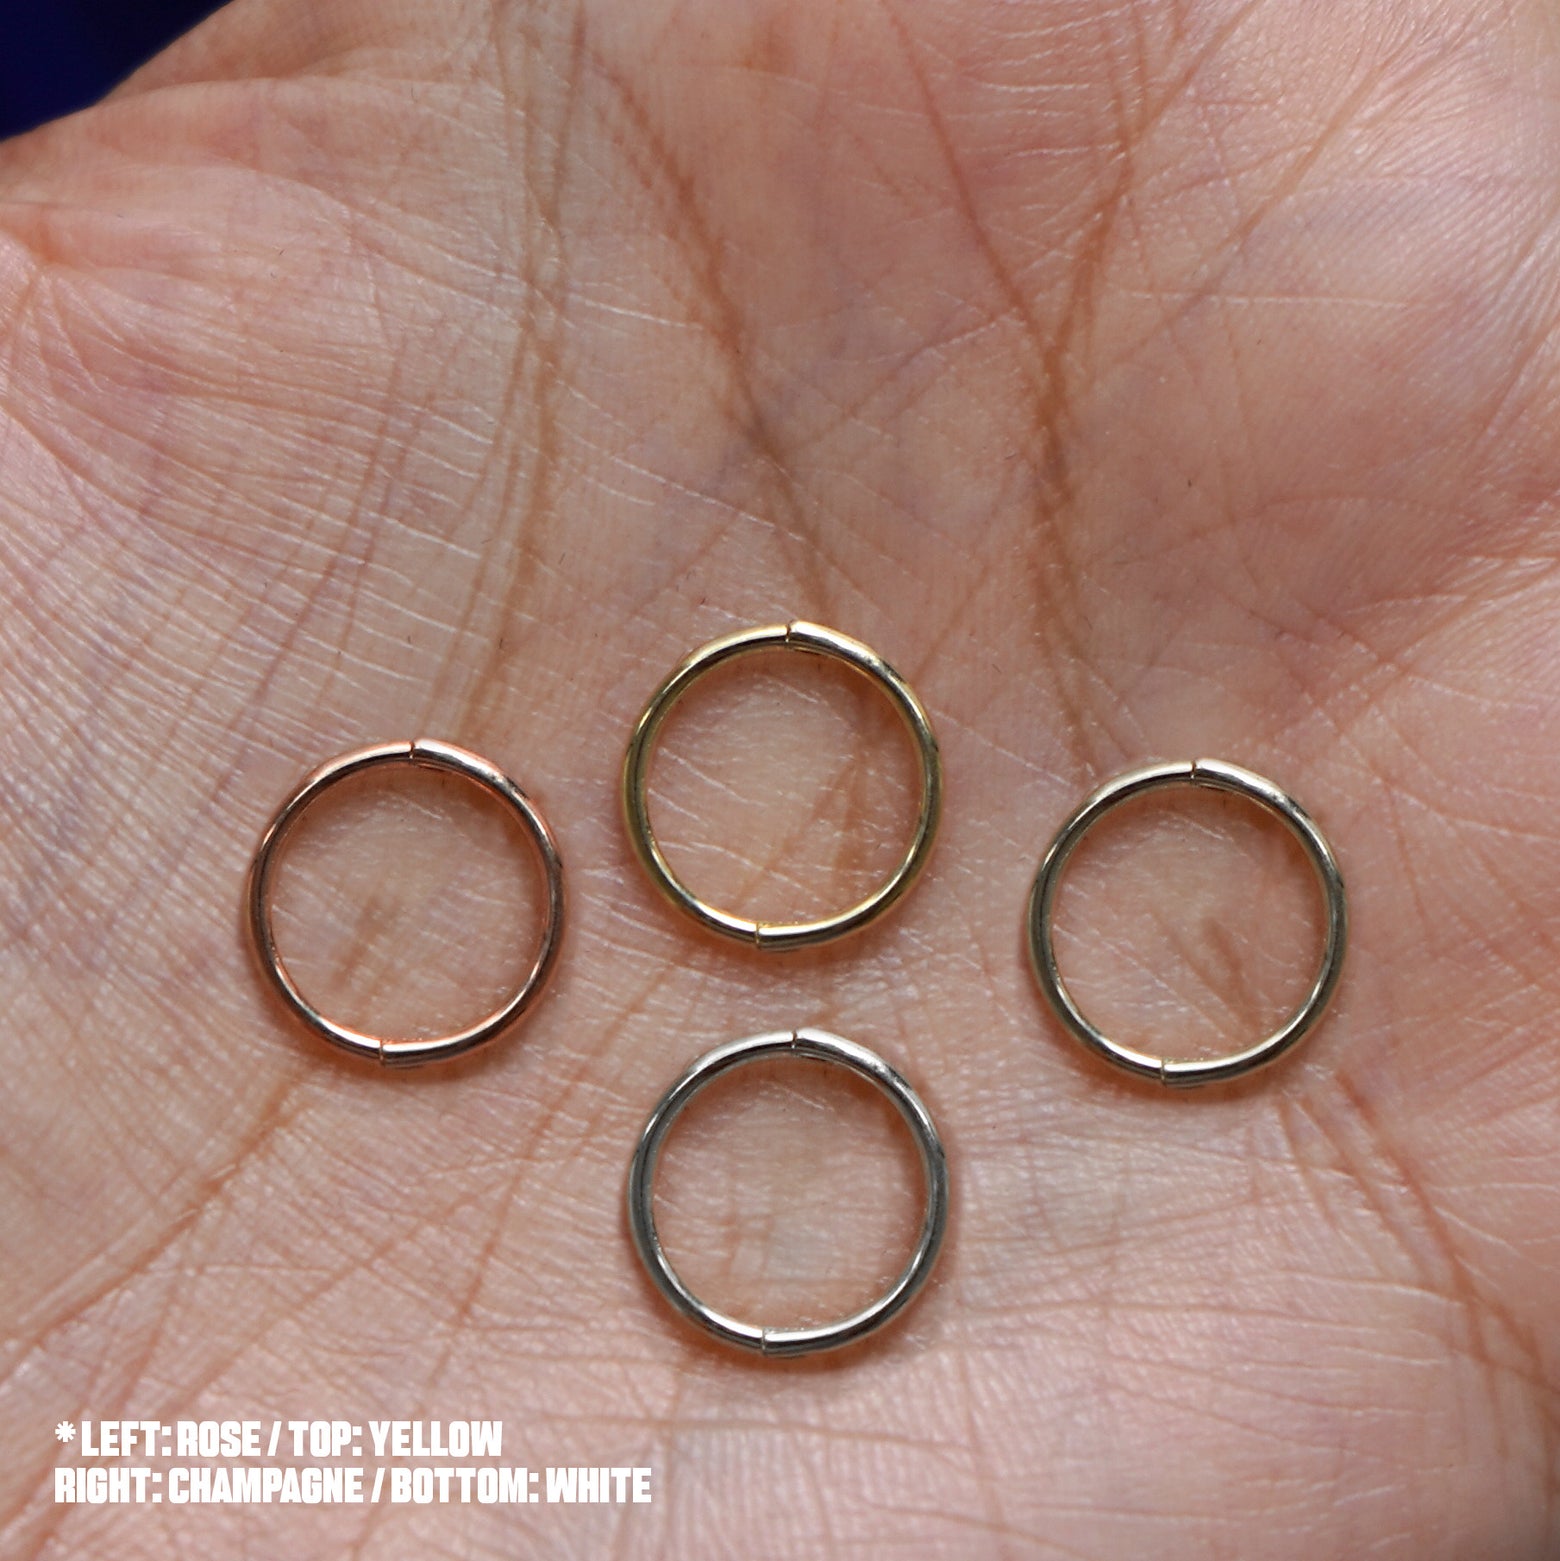 Four versions of the Medium Seamless Huggie Hoop / Piercing shown in options of rose, yellow, champagne, and white gold